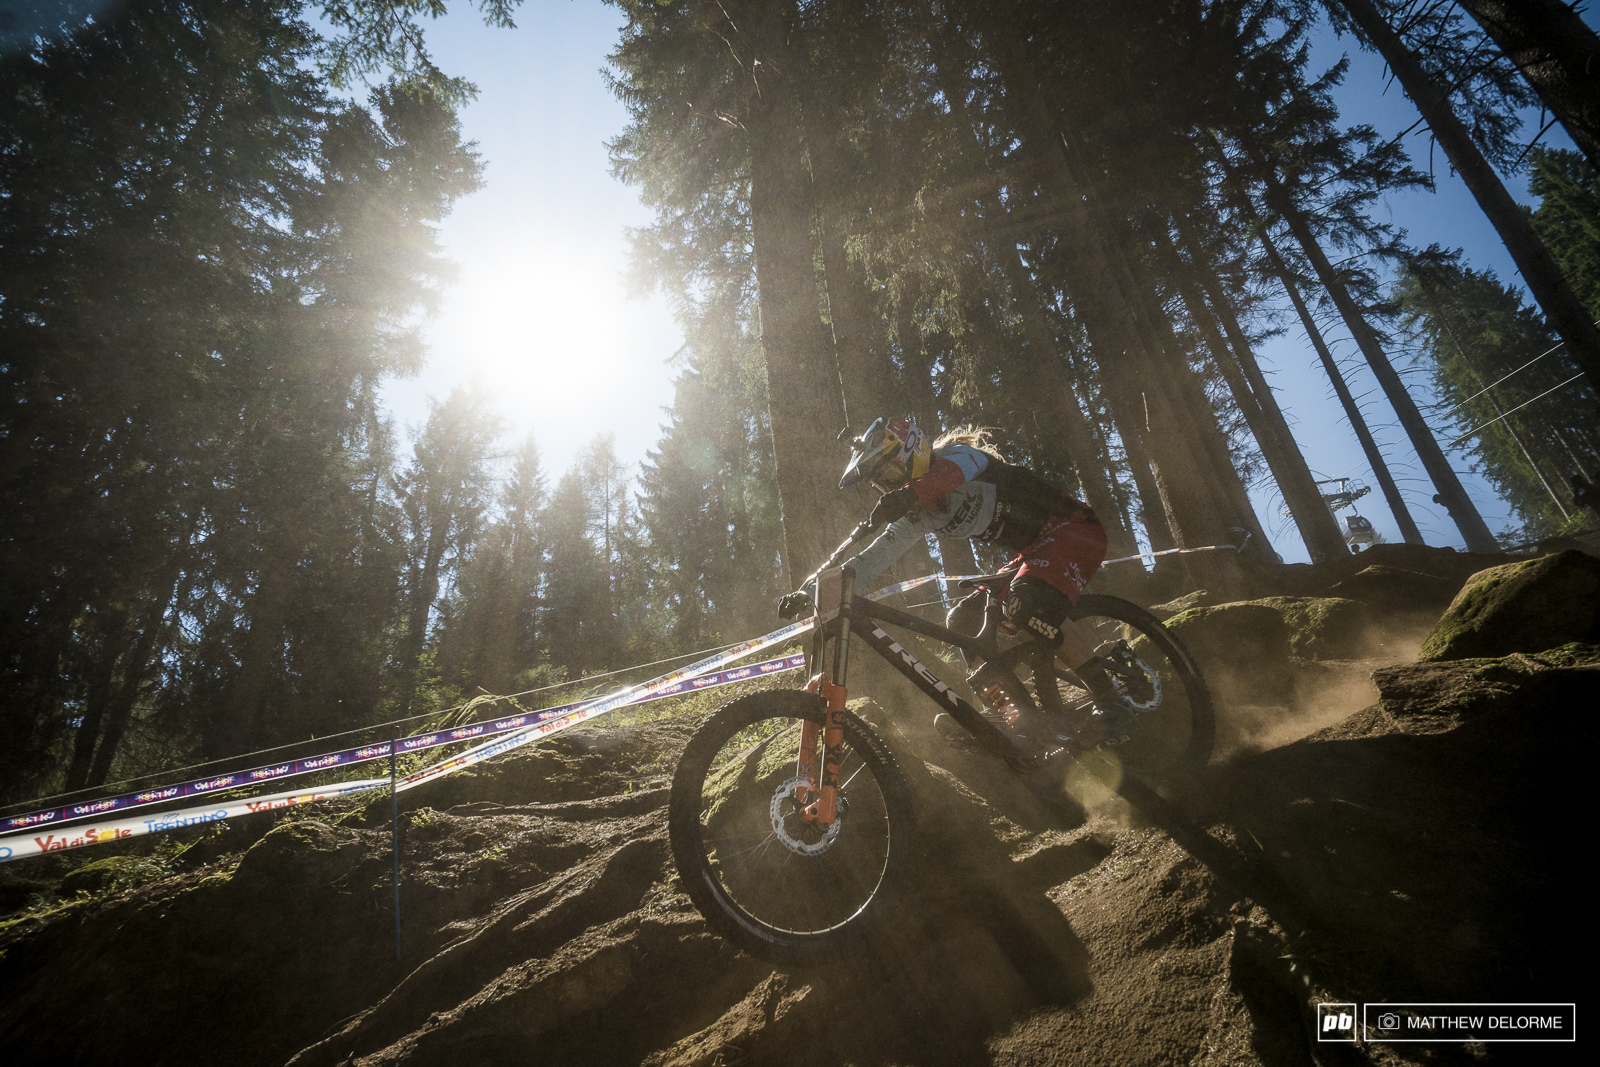 Rachel Atherton making it look all too easy.